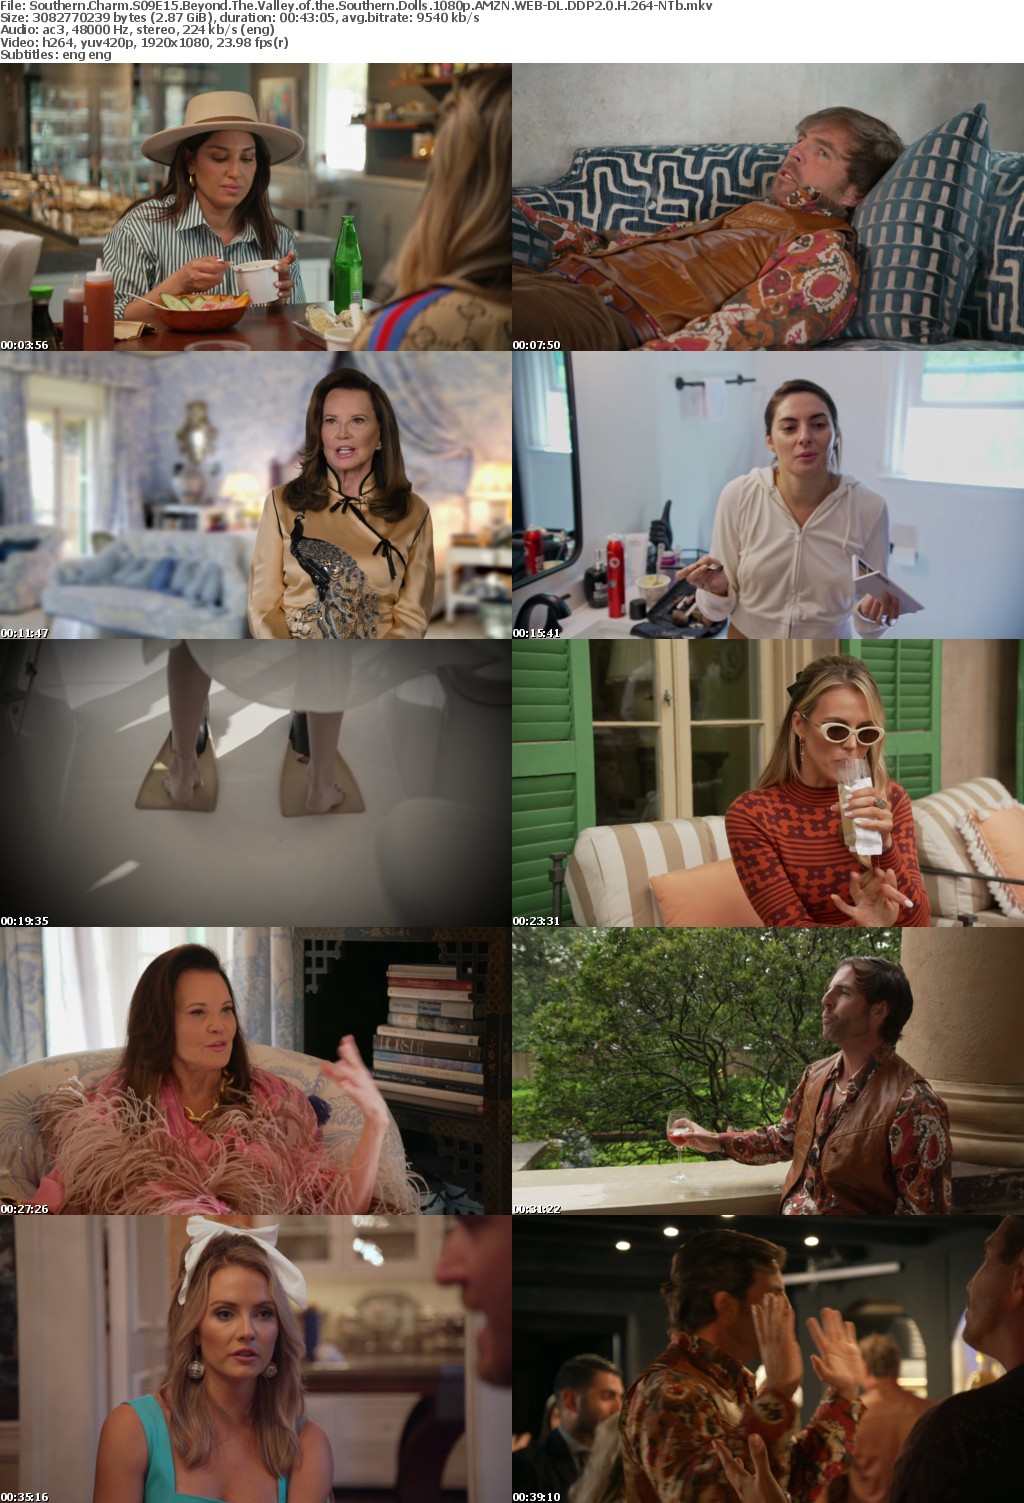 Southern Charm S09E15 Beyond The Valley of the Southern Dolls 1080p AMZN WEB-DL DDP2 0 H 264-NTb